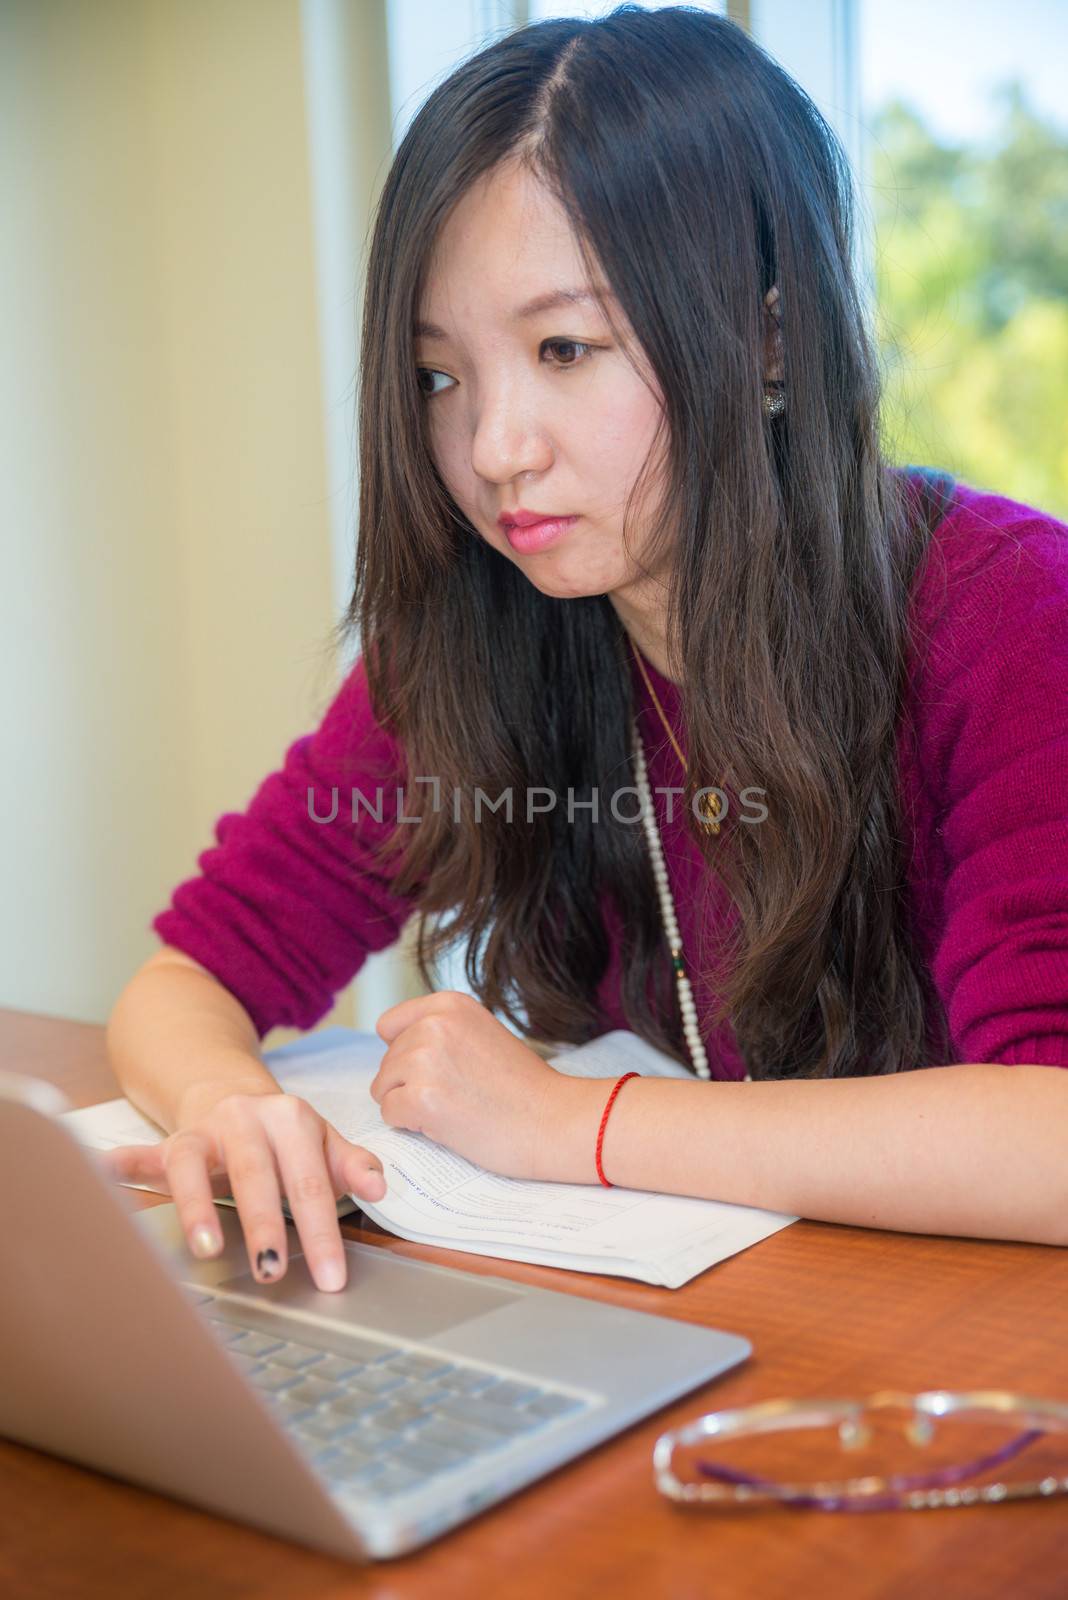 Young woman studying on laptop in front of a large window